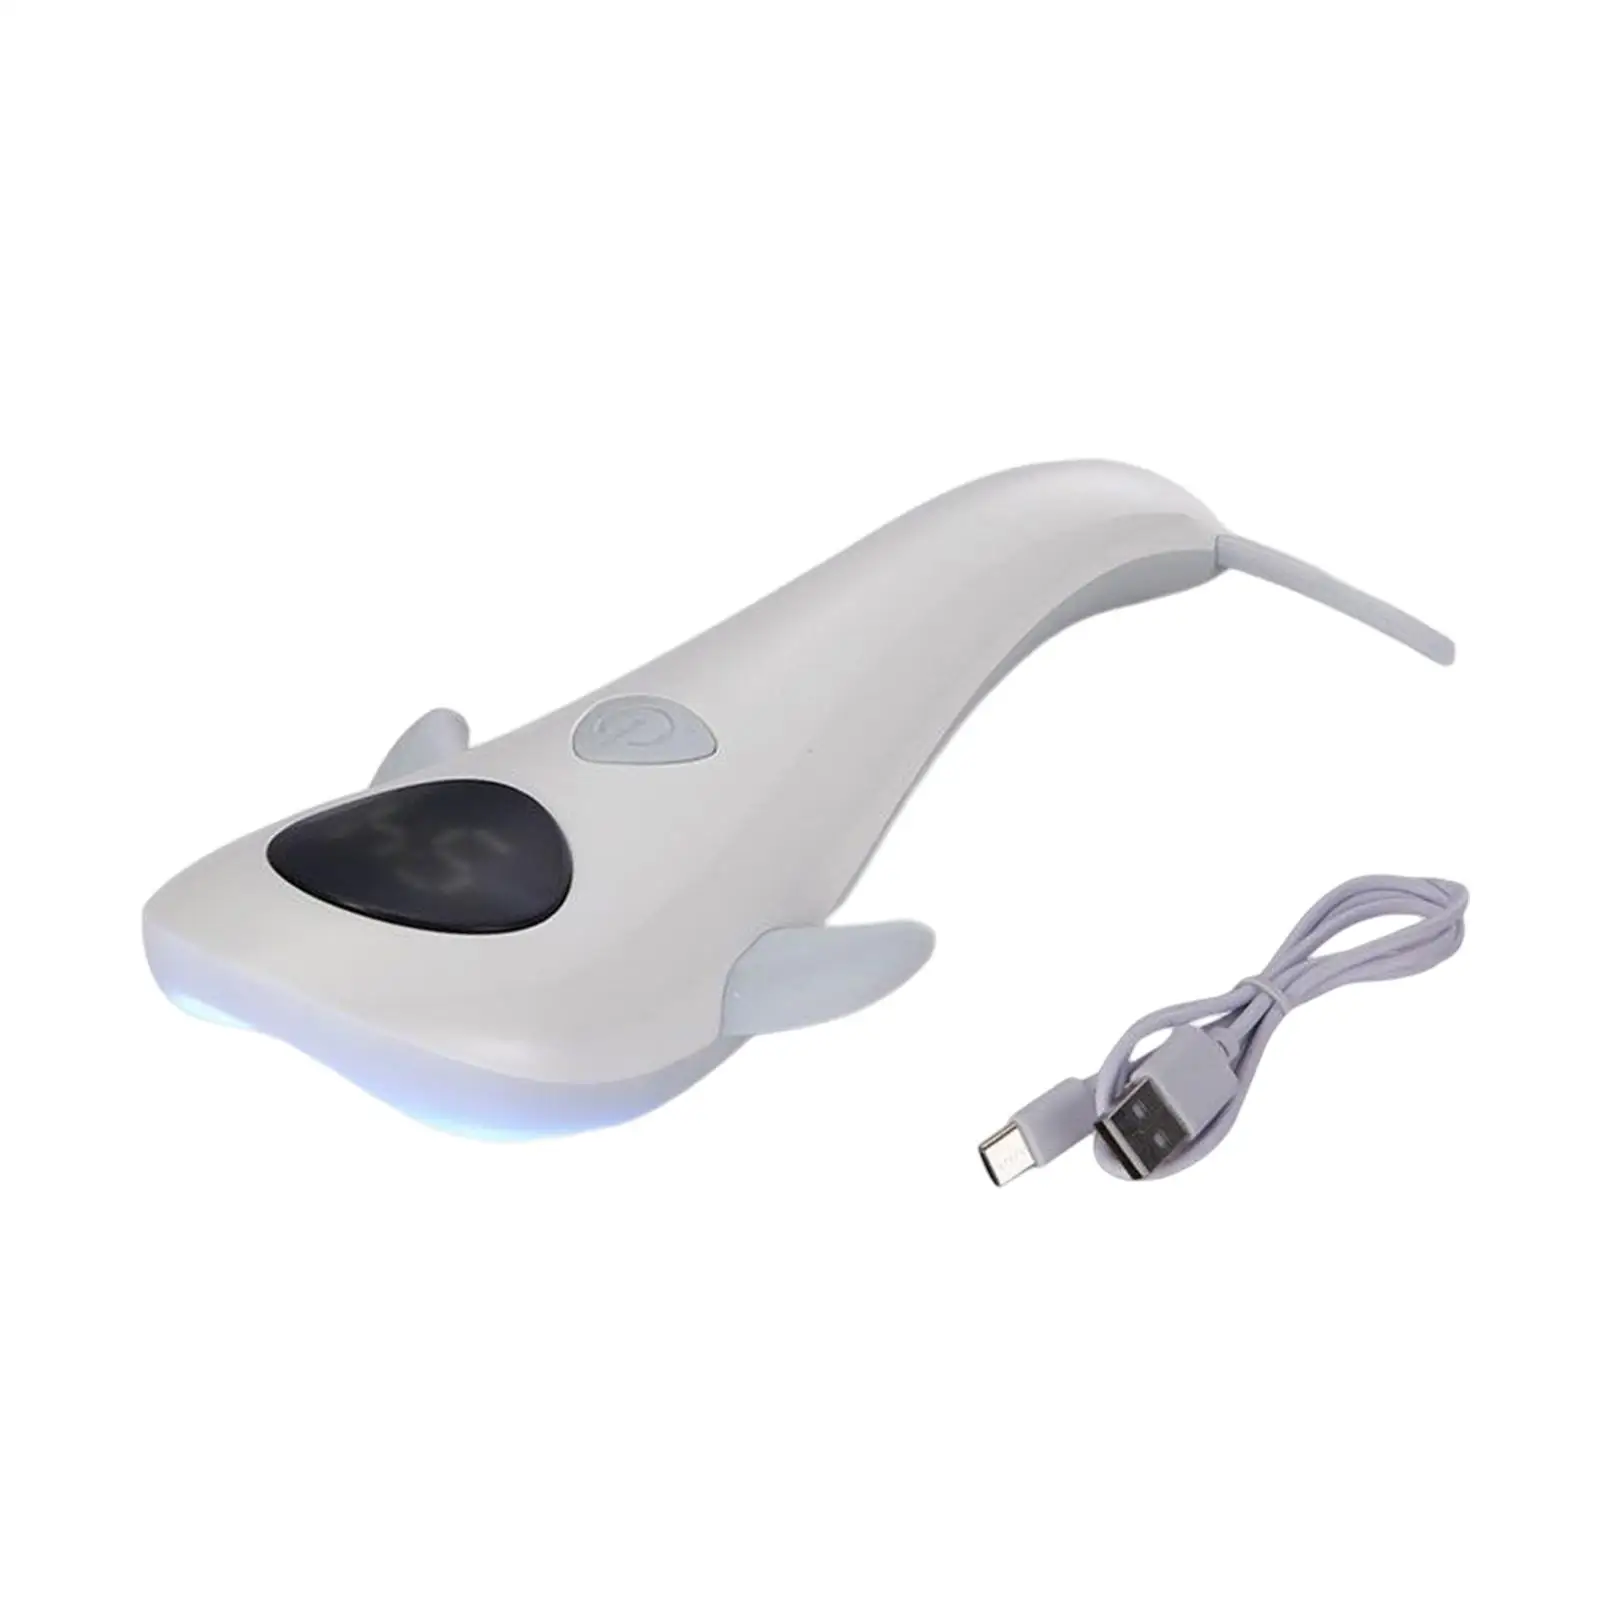 Handheld Nail Lamp with 60S 90S 2 timers Salon Use Quick Drying Use C Nail Art Tools 3 Lamp Beads 5W Nail Dryer Gel Nail Light